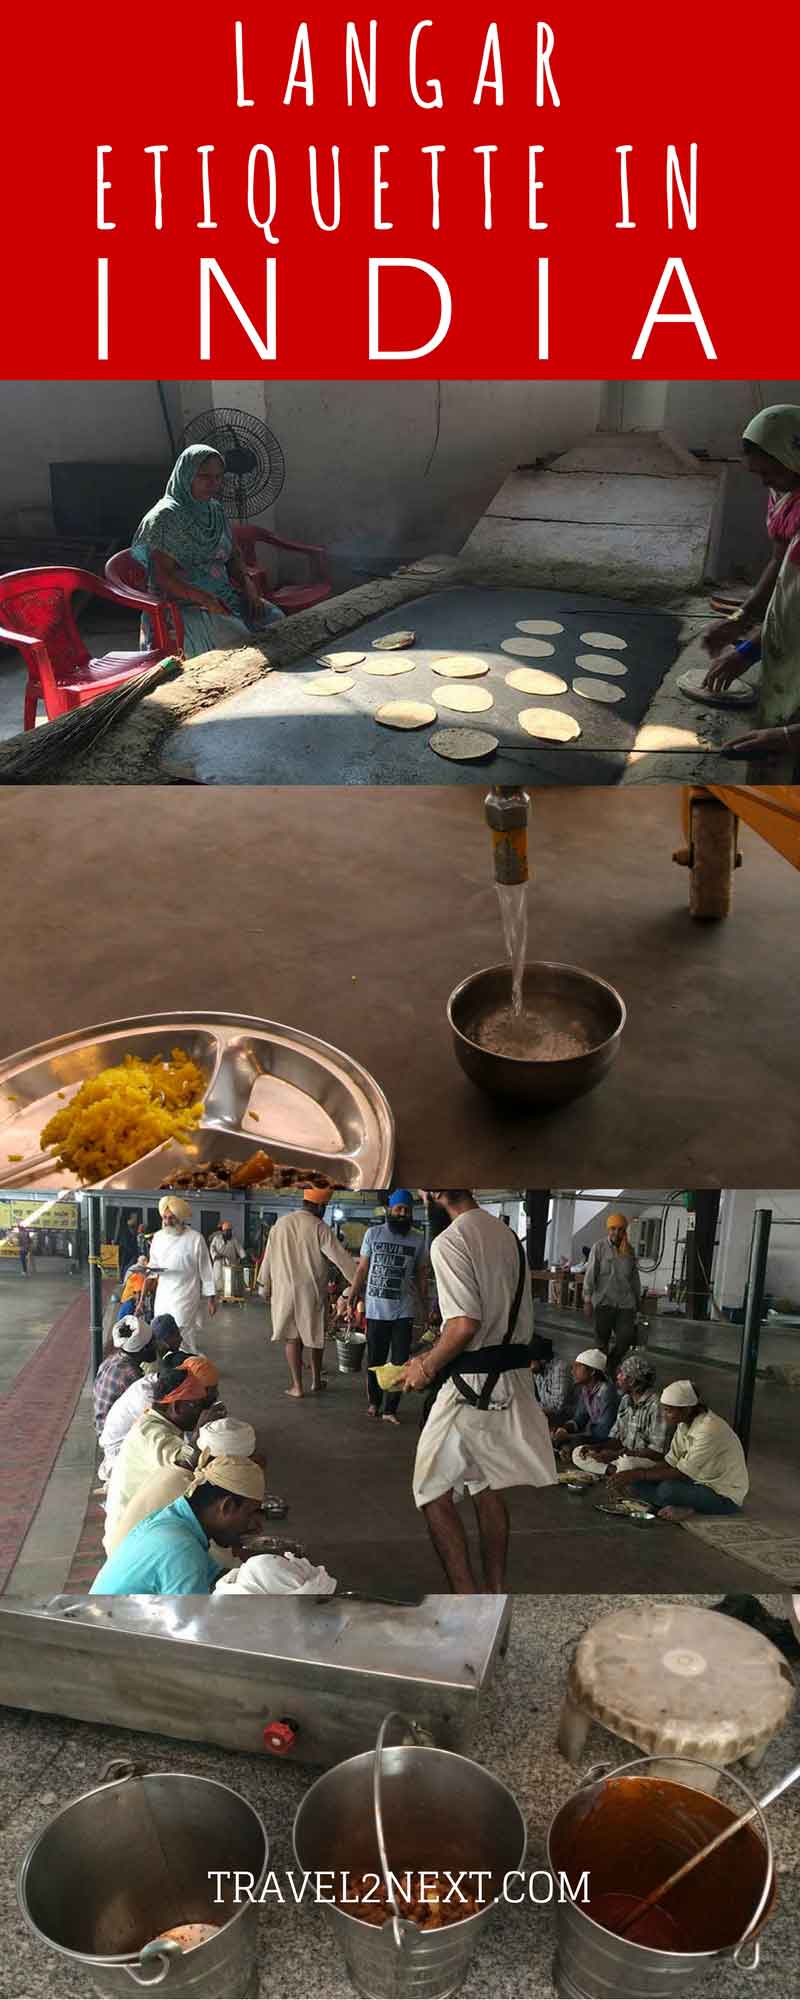 Langar Etiquette in India – 10 tips to visit like a local